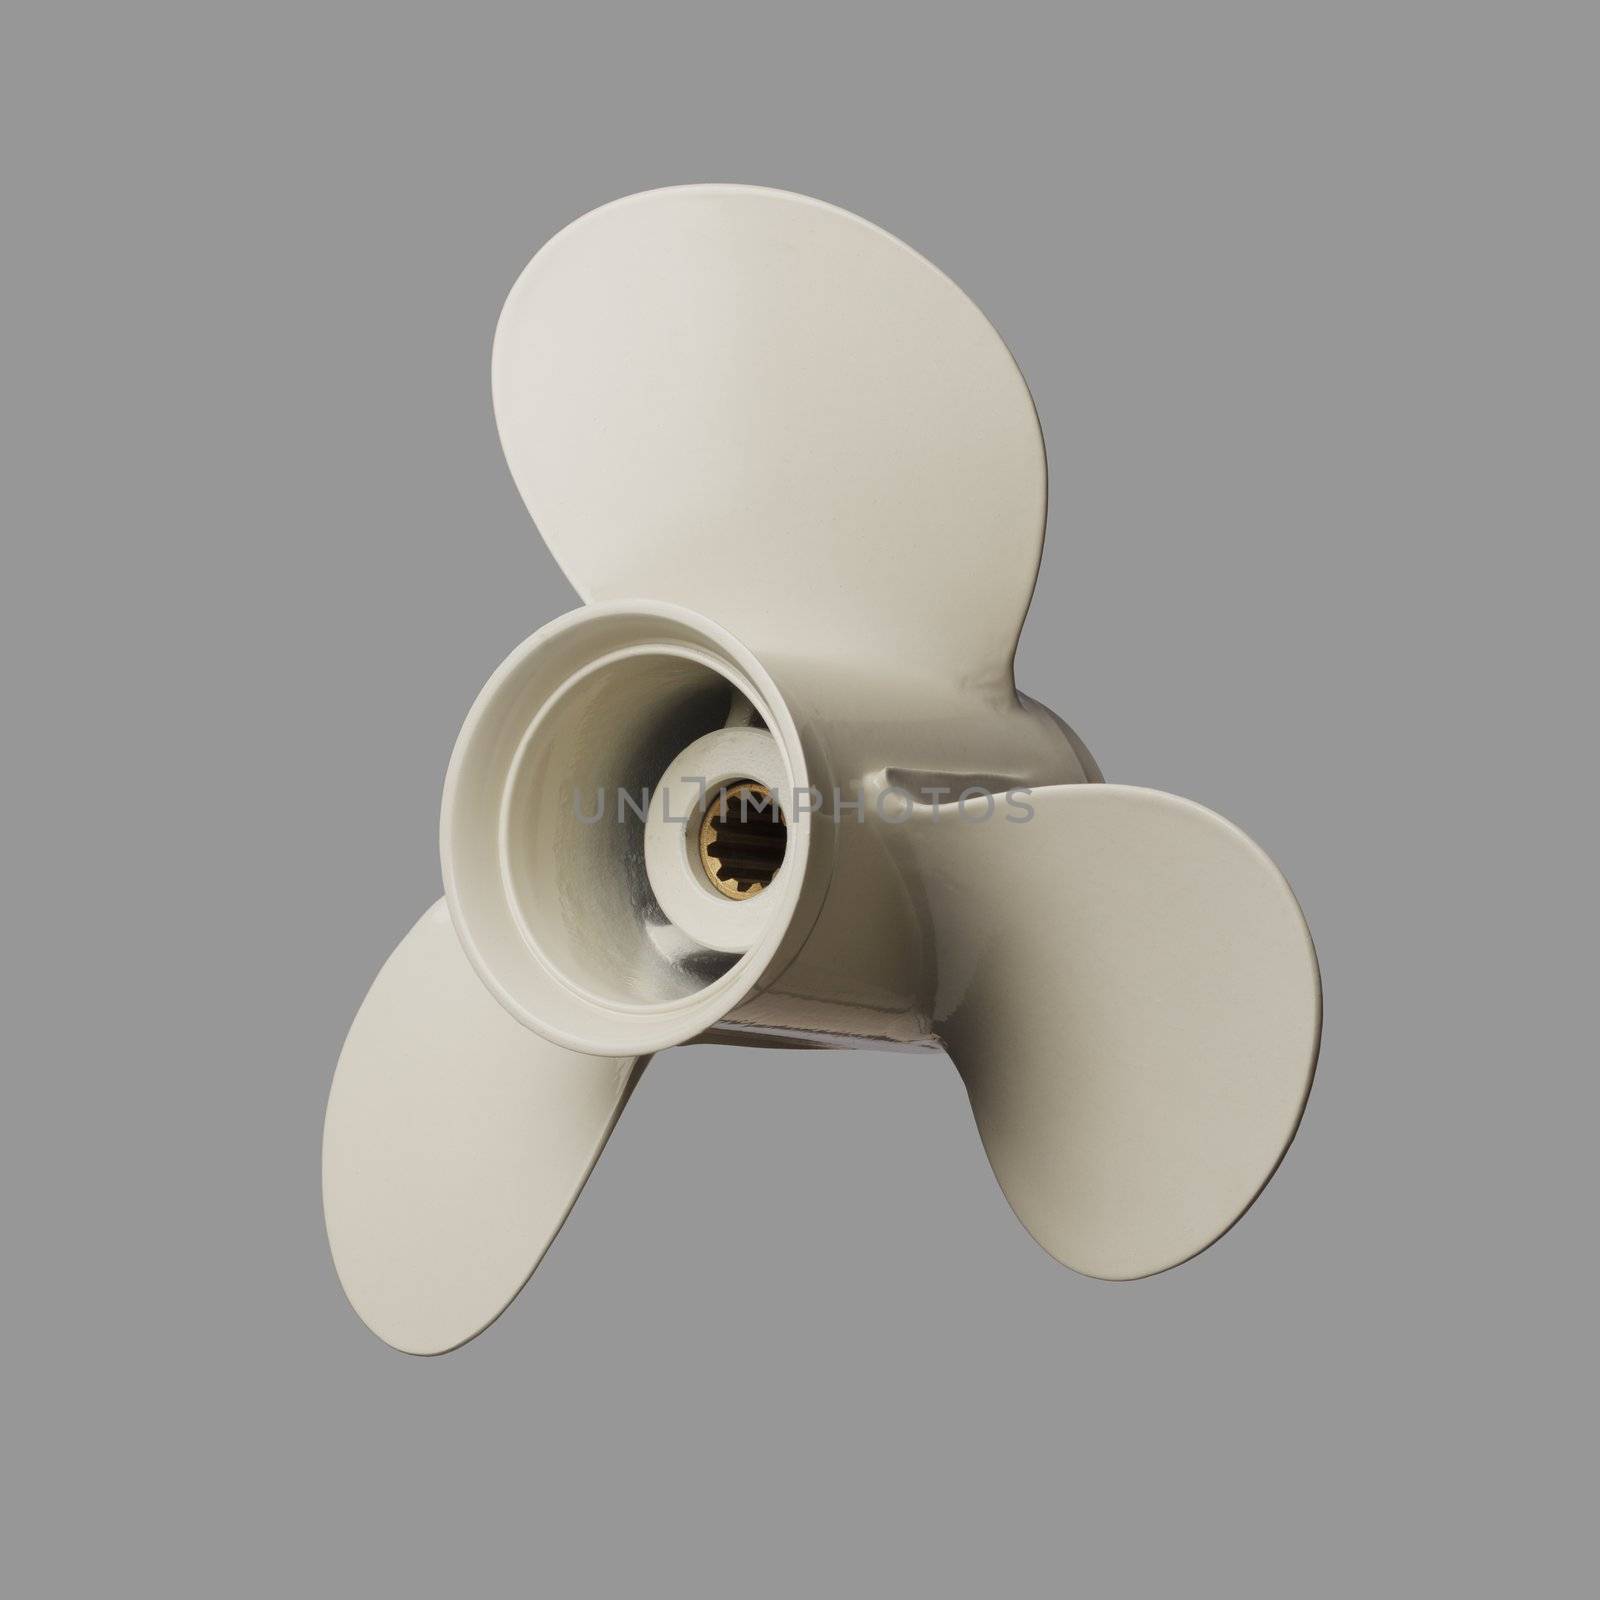 20hp outboard engine propeller on grey background